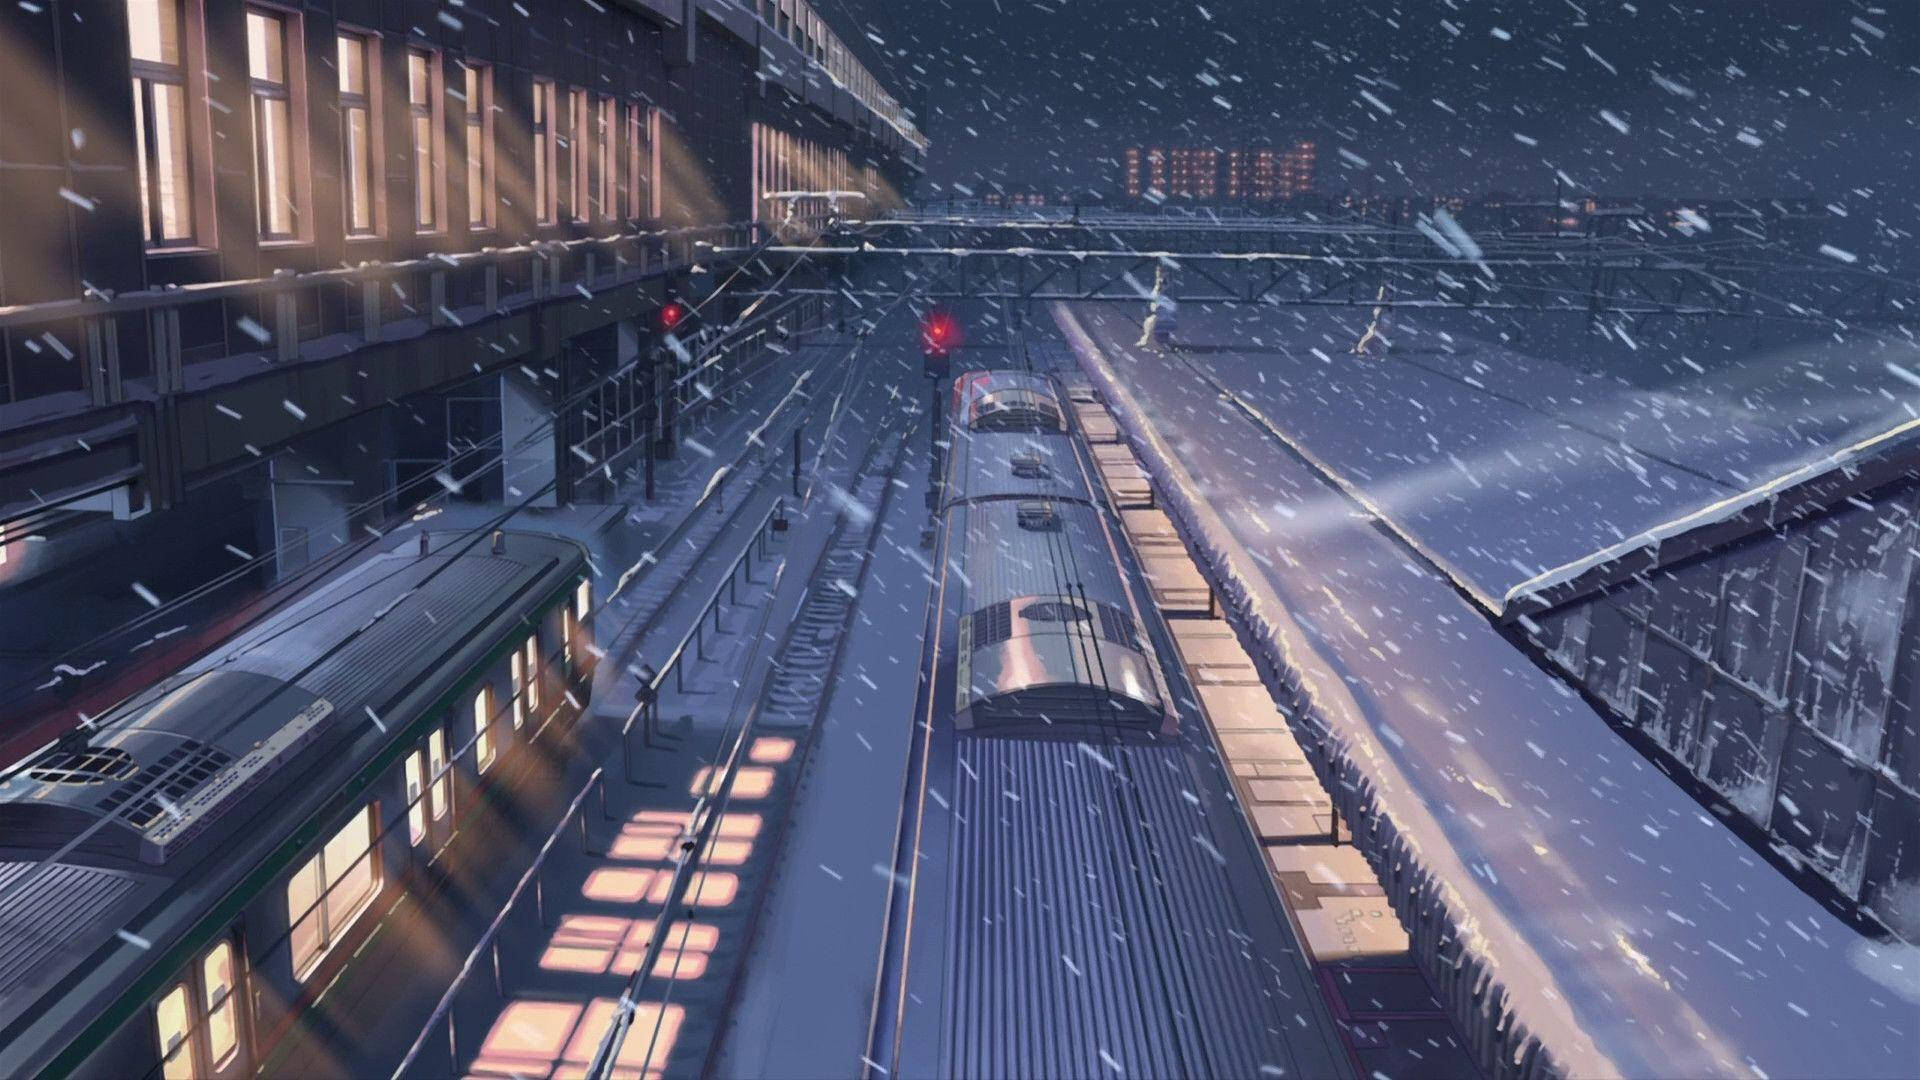 5 Centimeters Per Second Snowy Night Background